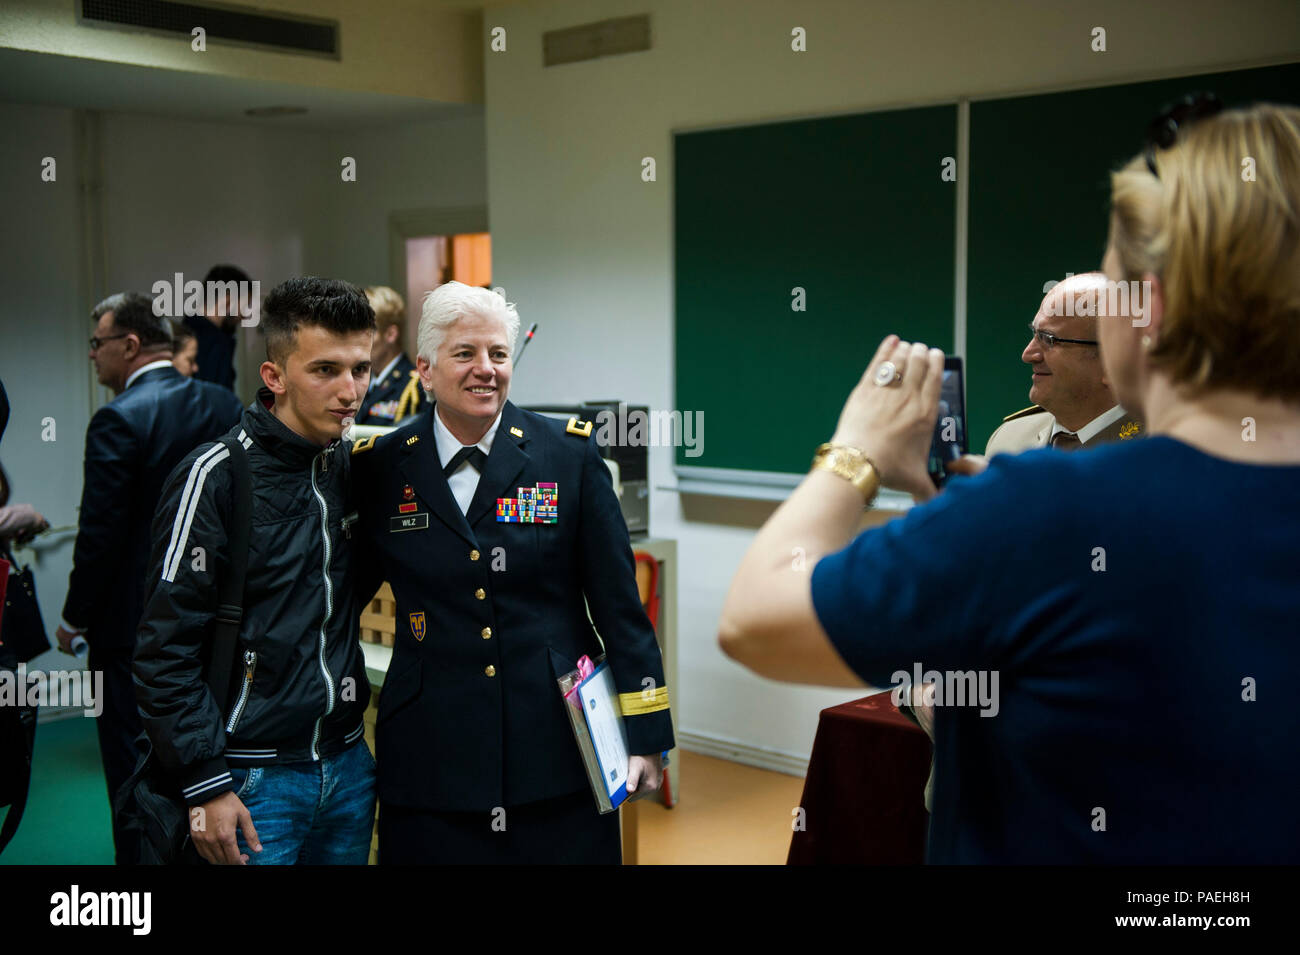 U.S. Army Brig. Gen. Giselle Wilz, NATO Headquarters Sarajevo commander, poses for a photo with a student after a discussion on NATO and defense issues at the University of Tuzla's Faculty of Law in Tuzla, Bosnia and Herzegovina, March 31, 2016. Wilz spoke on the purpose and goals of NATO. (U.S. Air Force photo by Staff Sgt. Clayton Lenhardt/Released) Stock Photo